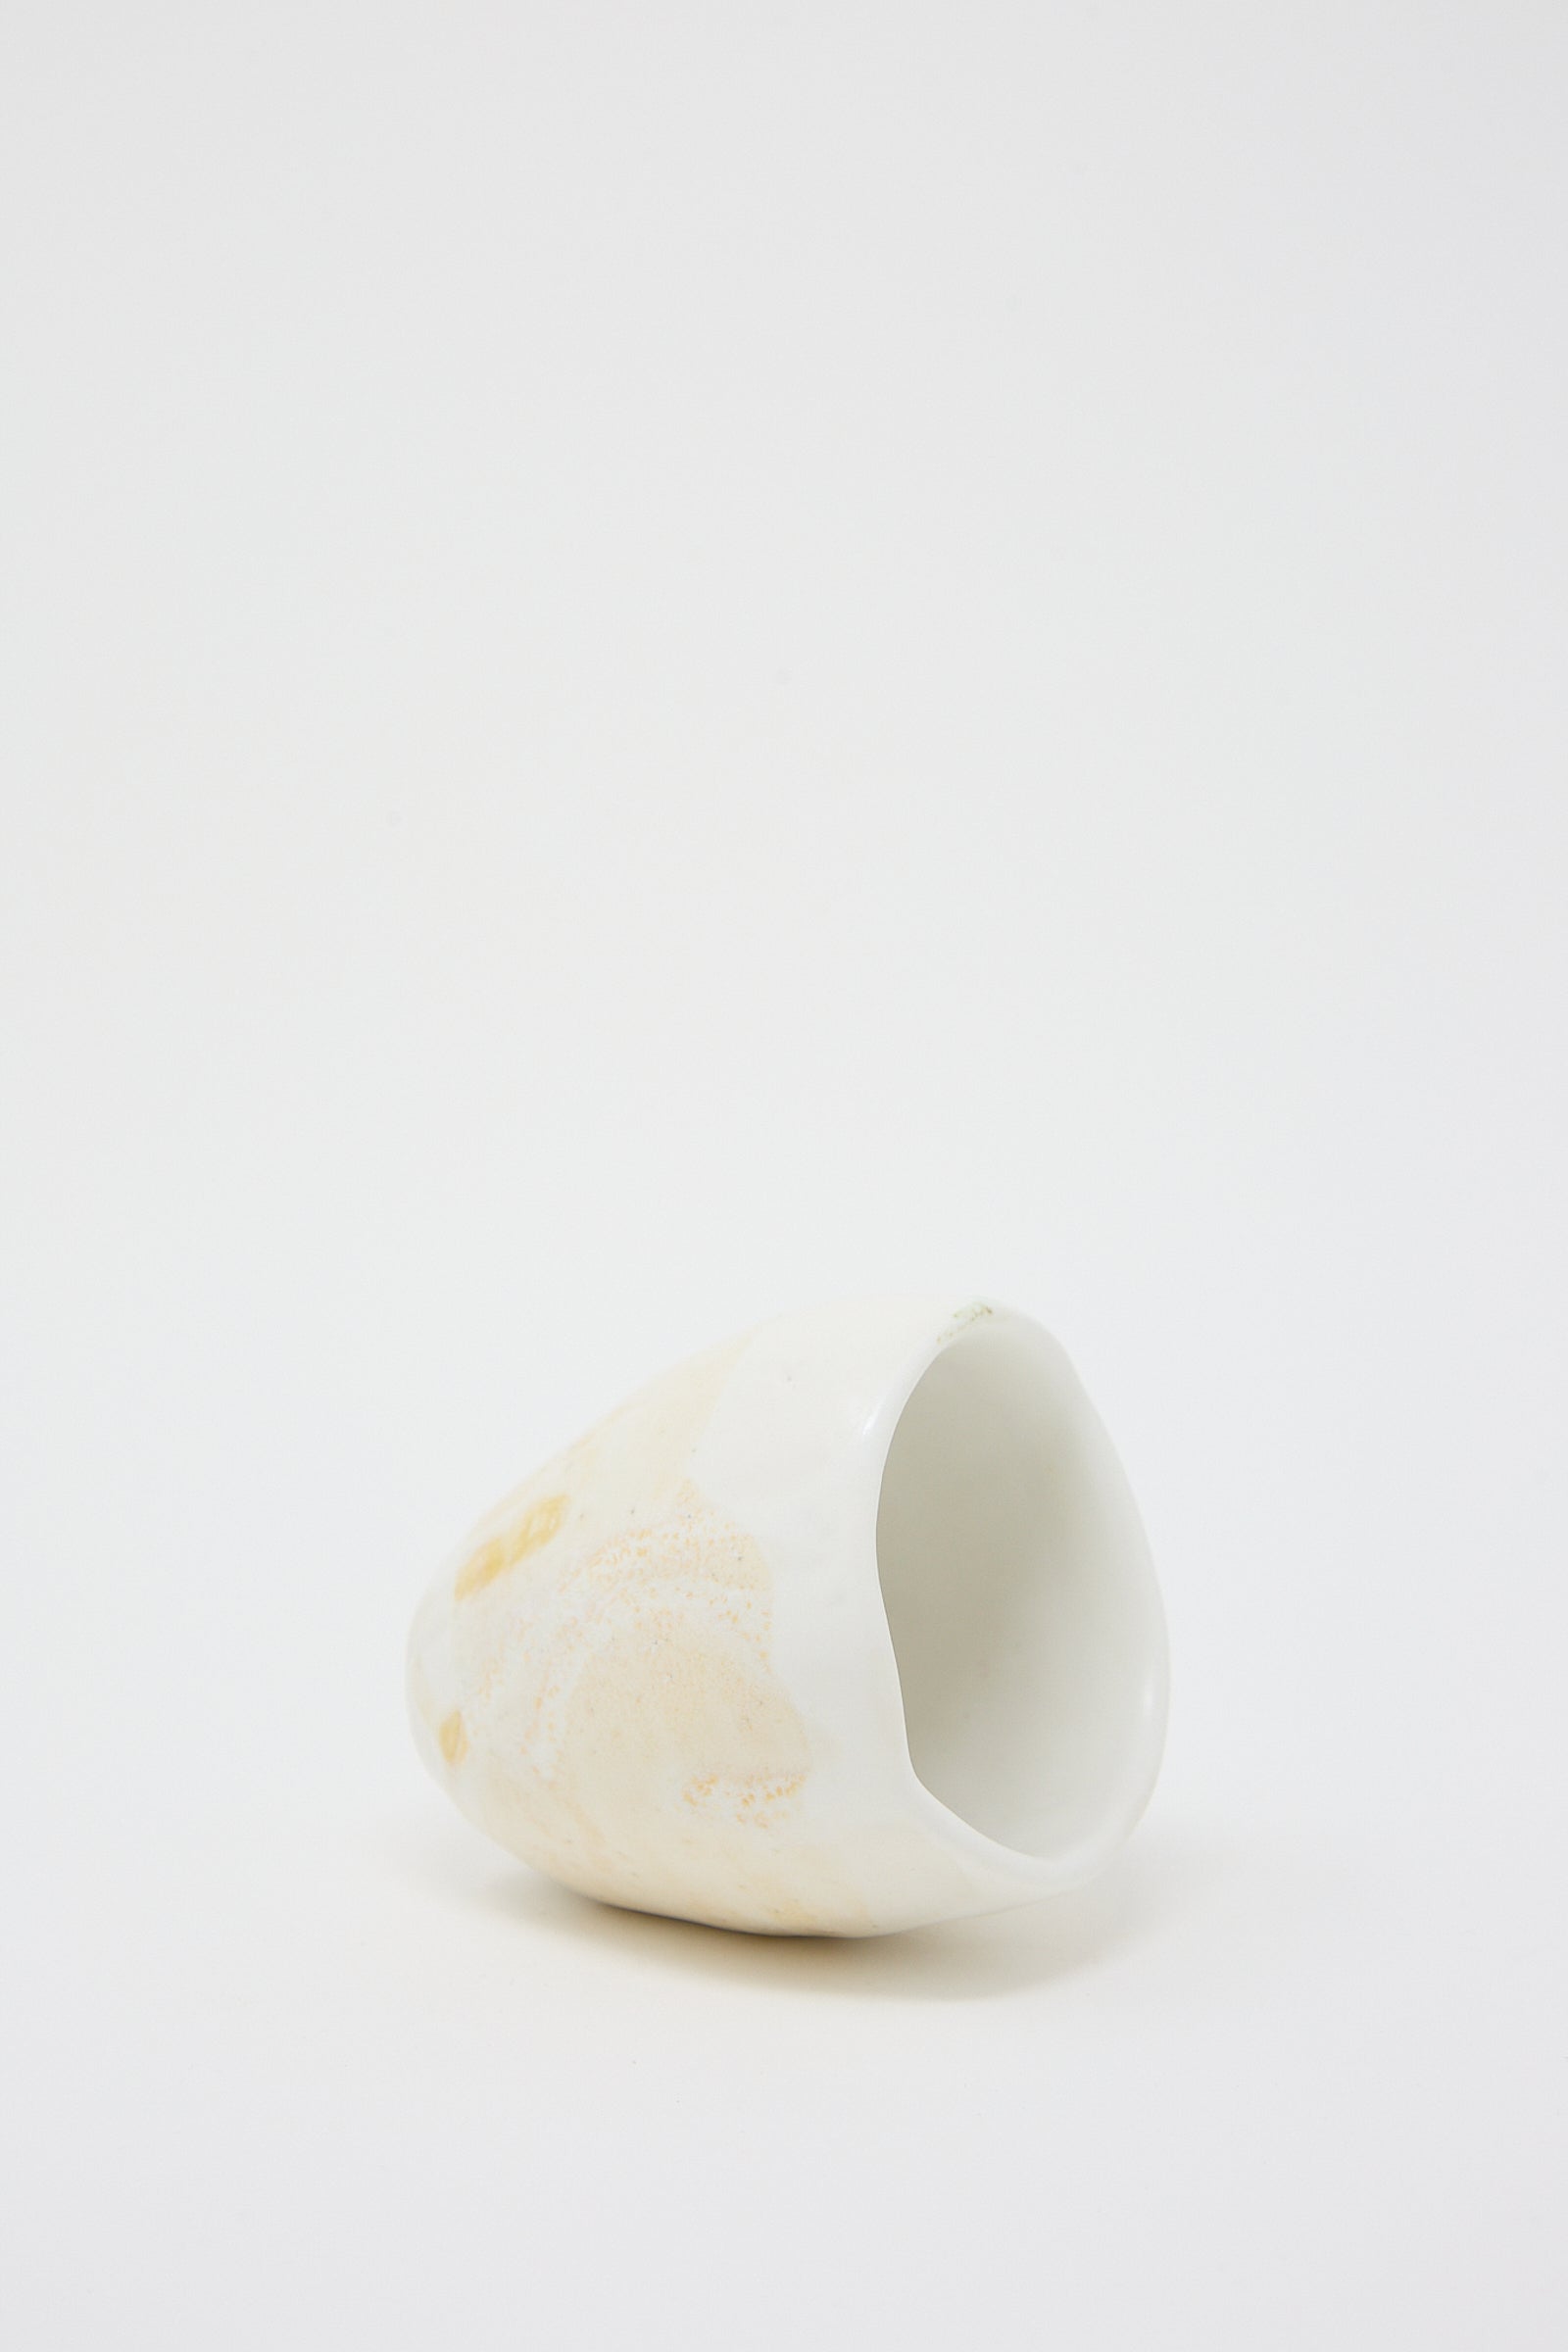 A small beige and white Porcelain Tumbler from MONDAYS on a white surface. Vessel laying on its side.